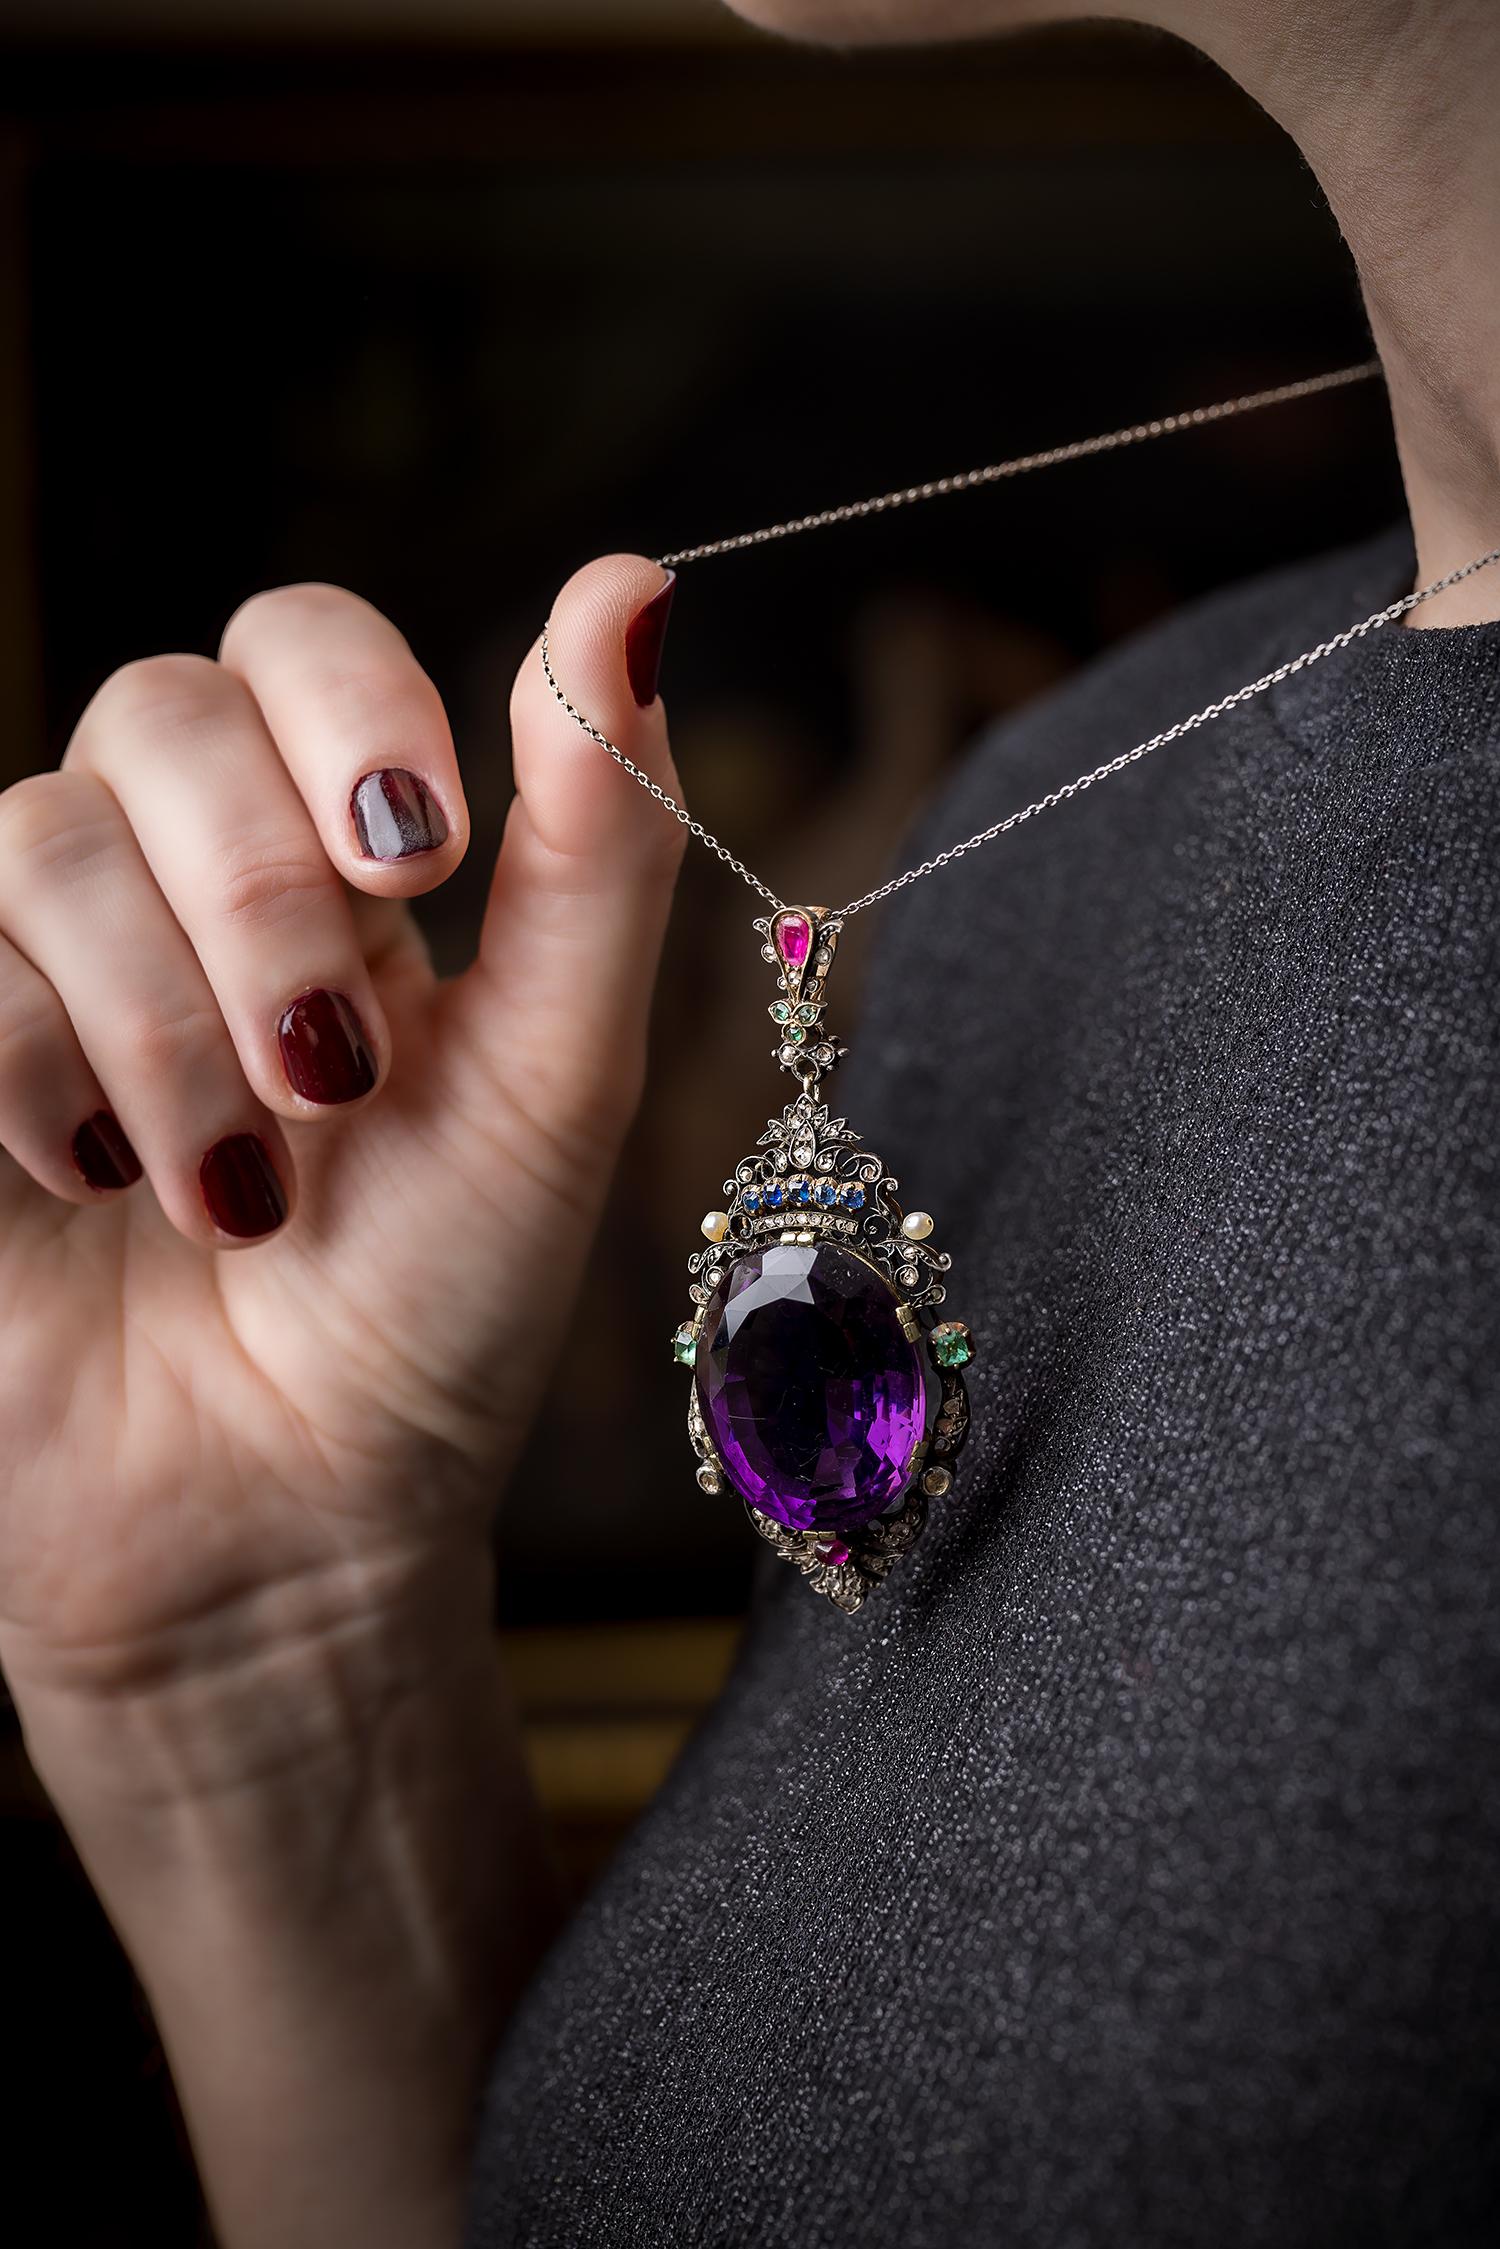 An impressive 45 carat oval faceted and deeply saturated amethyst gracefully set framed in a scrolling foliate under a sapphire crown and embellished by rubies, emeralds, sapphires, diamonds and oriental pearls, Masterfully hand fabricated in 14